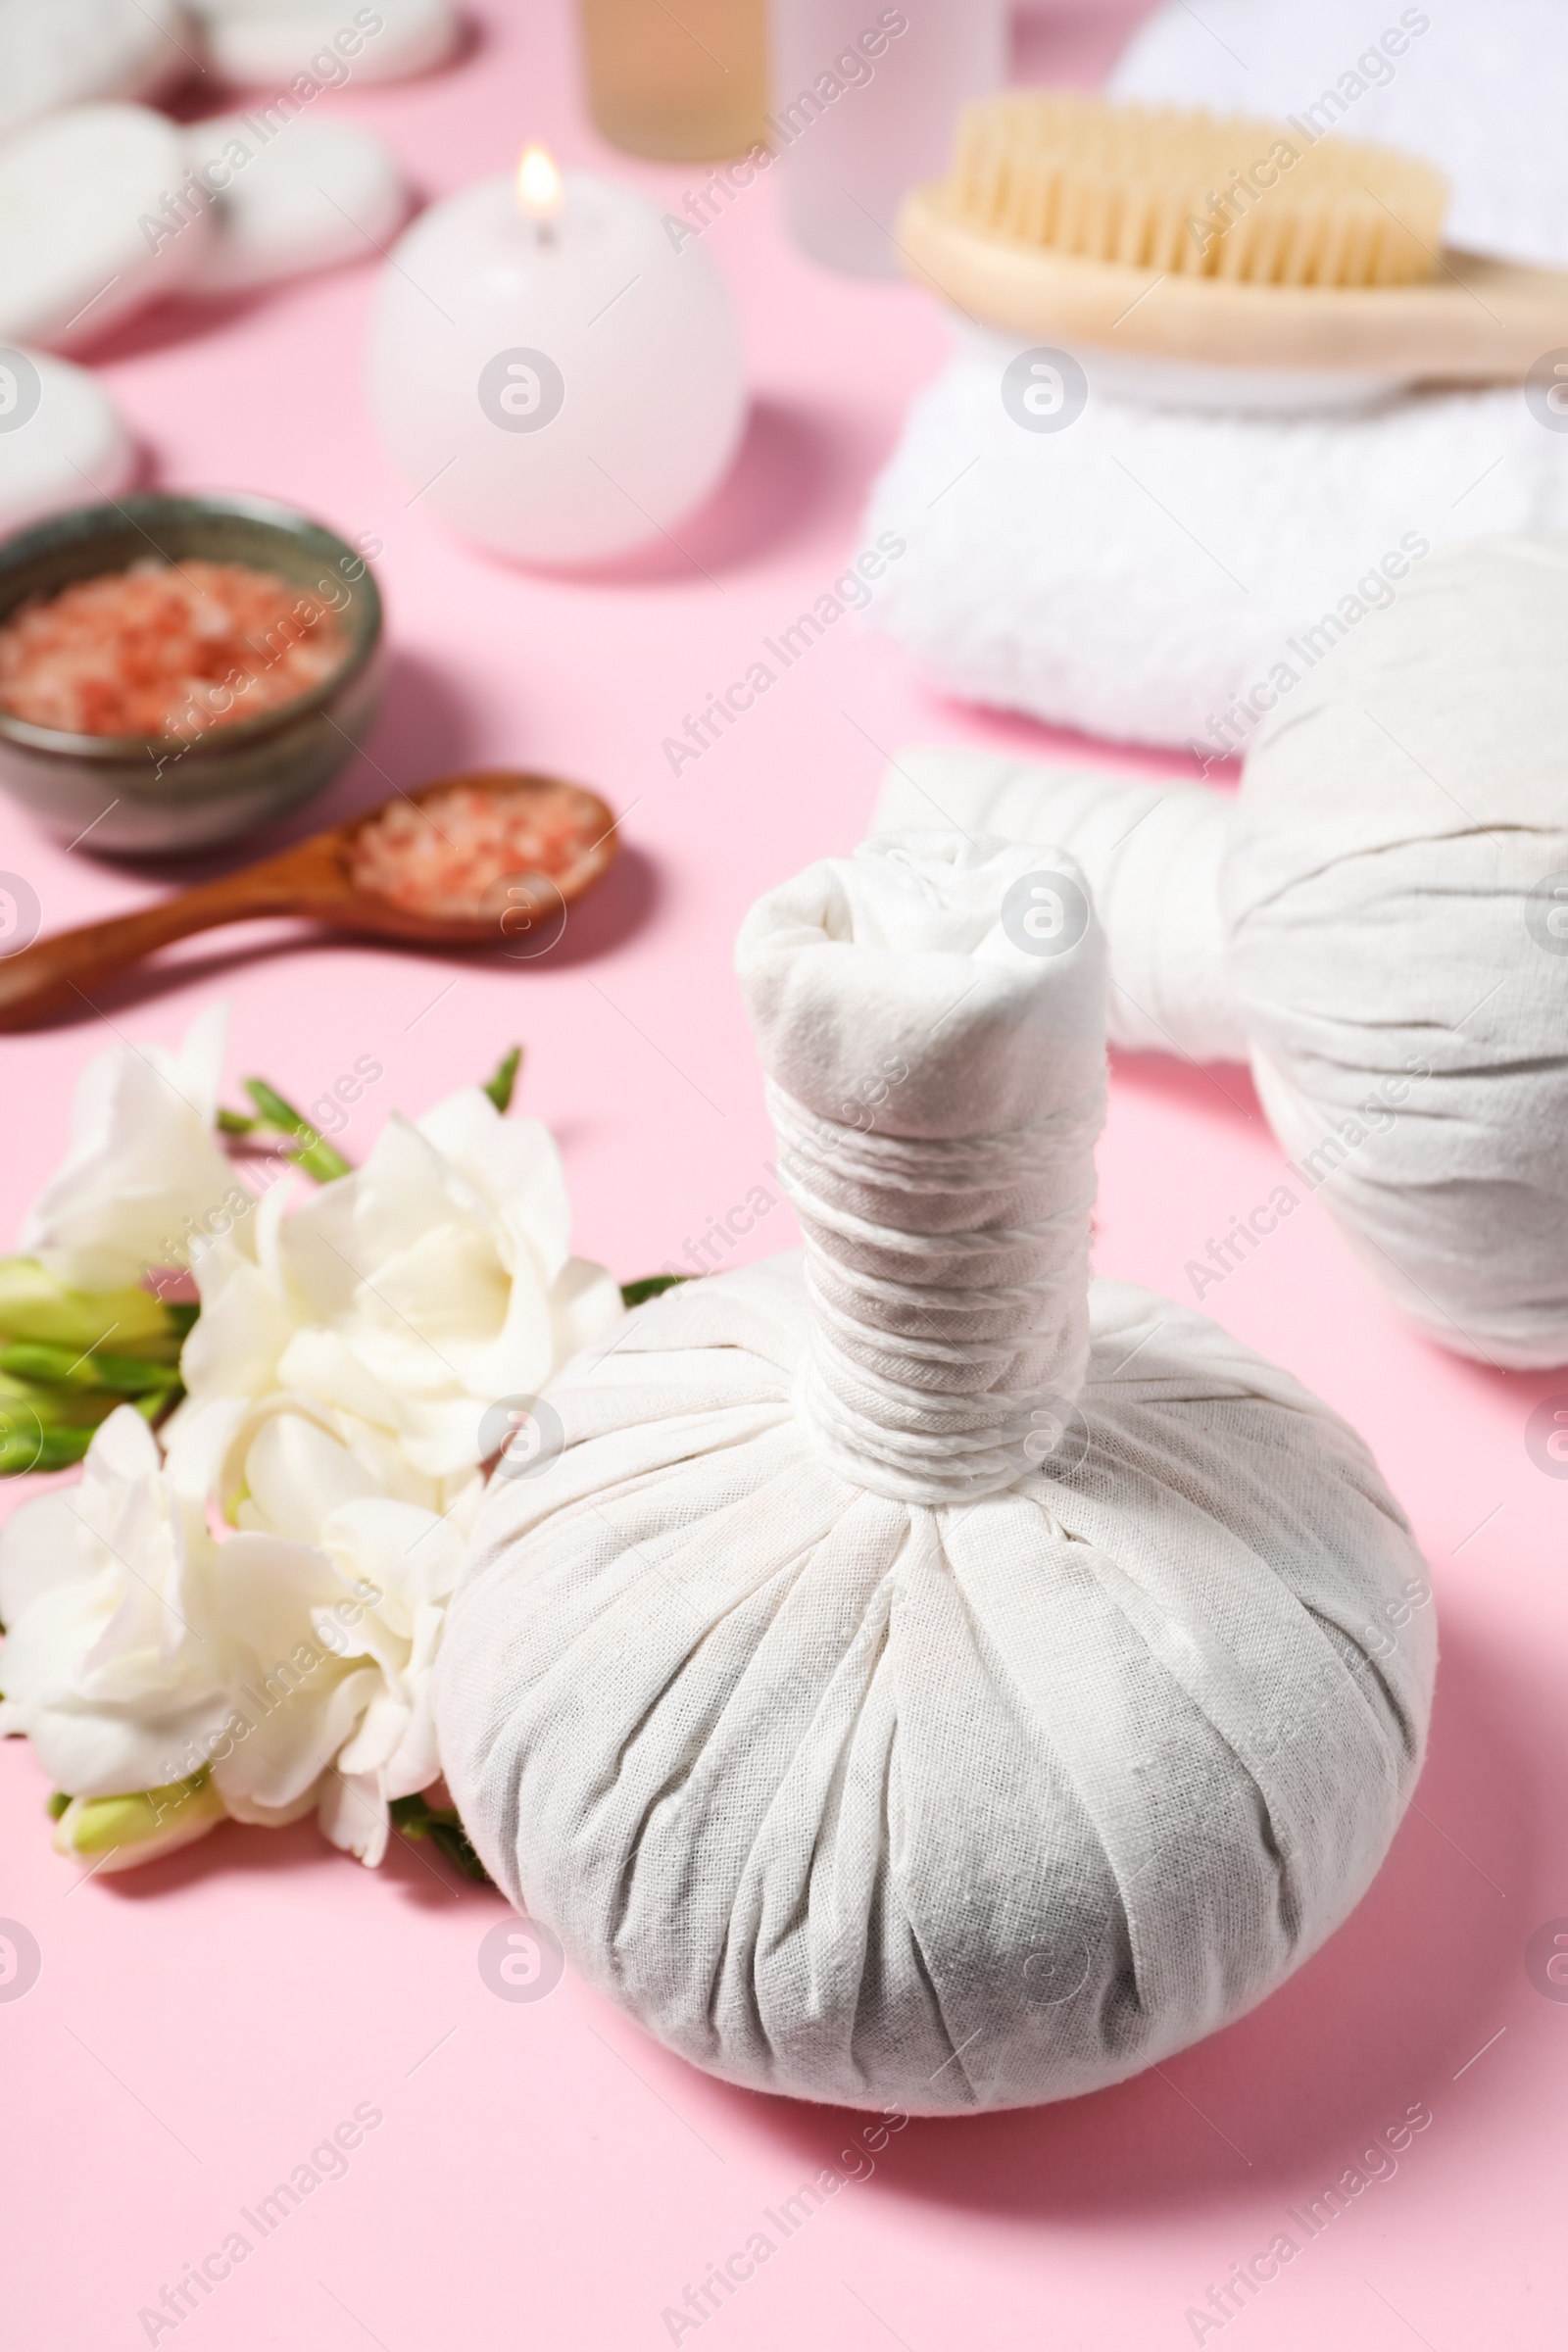 Photo of Herbal massage bags and other spa products on pink background, closeup